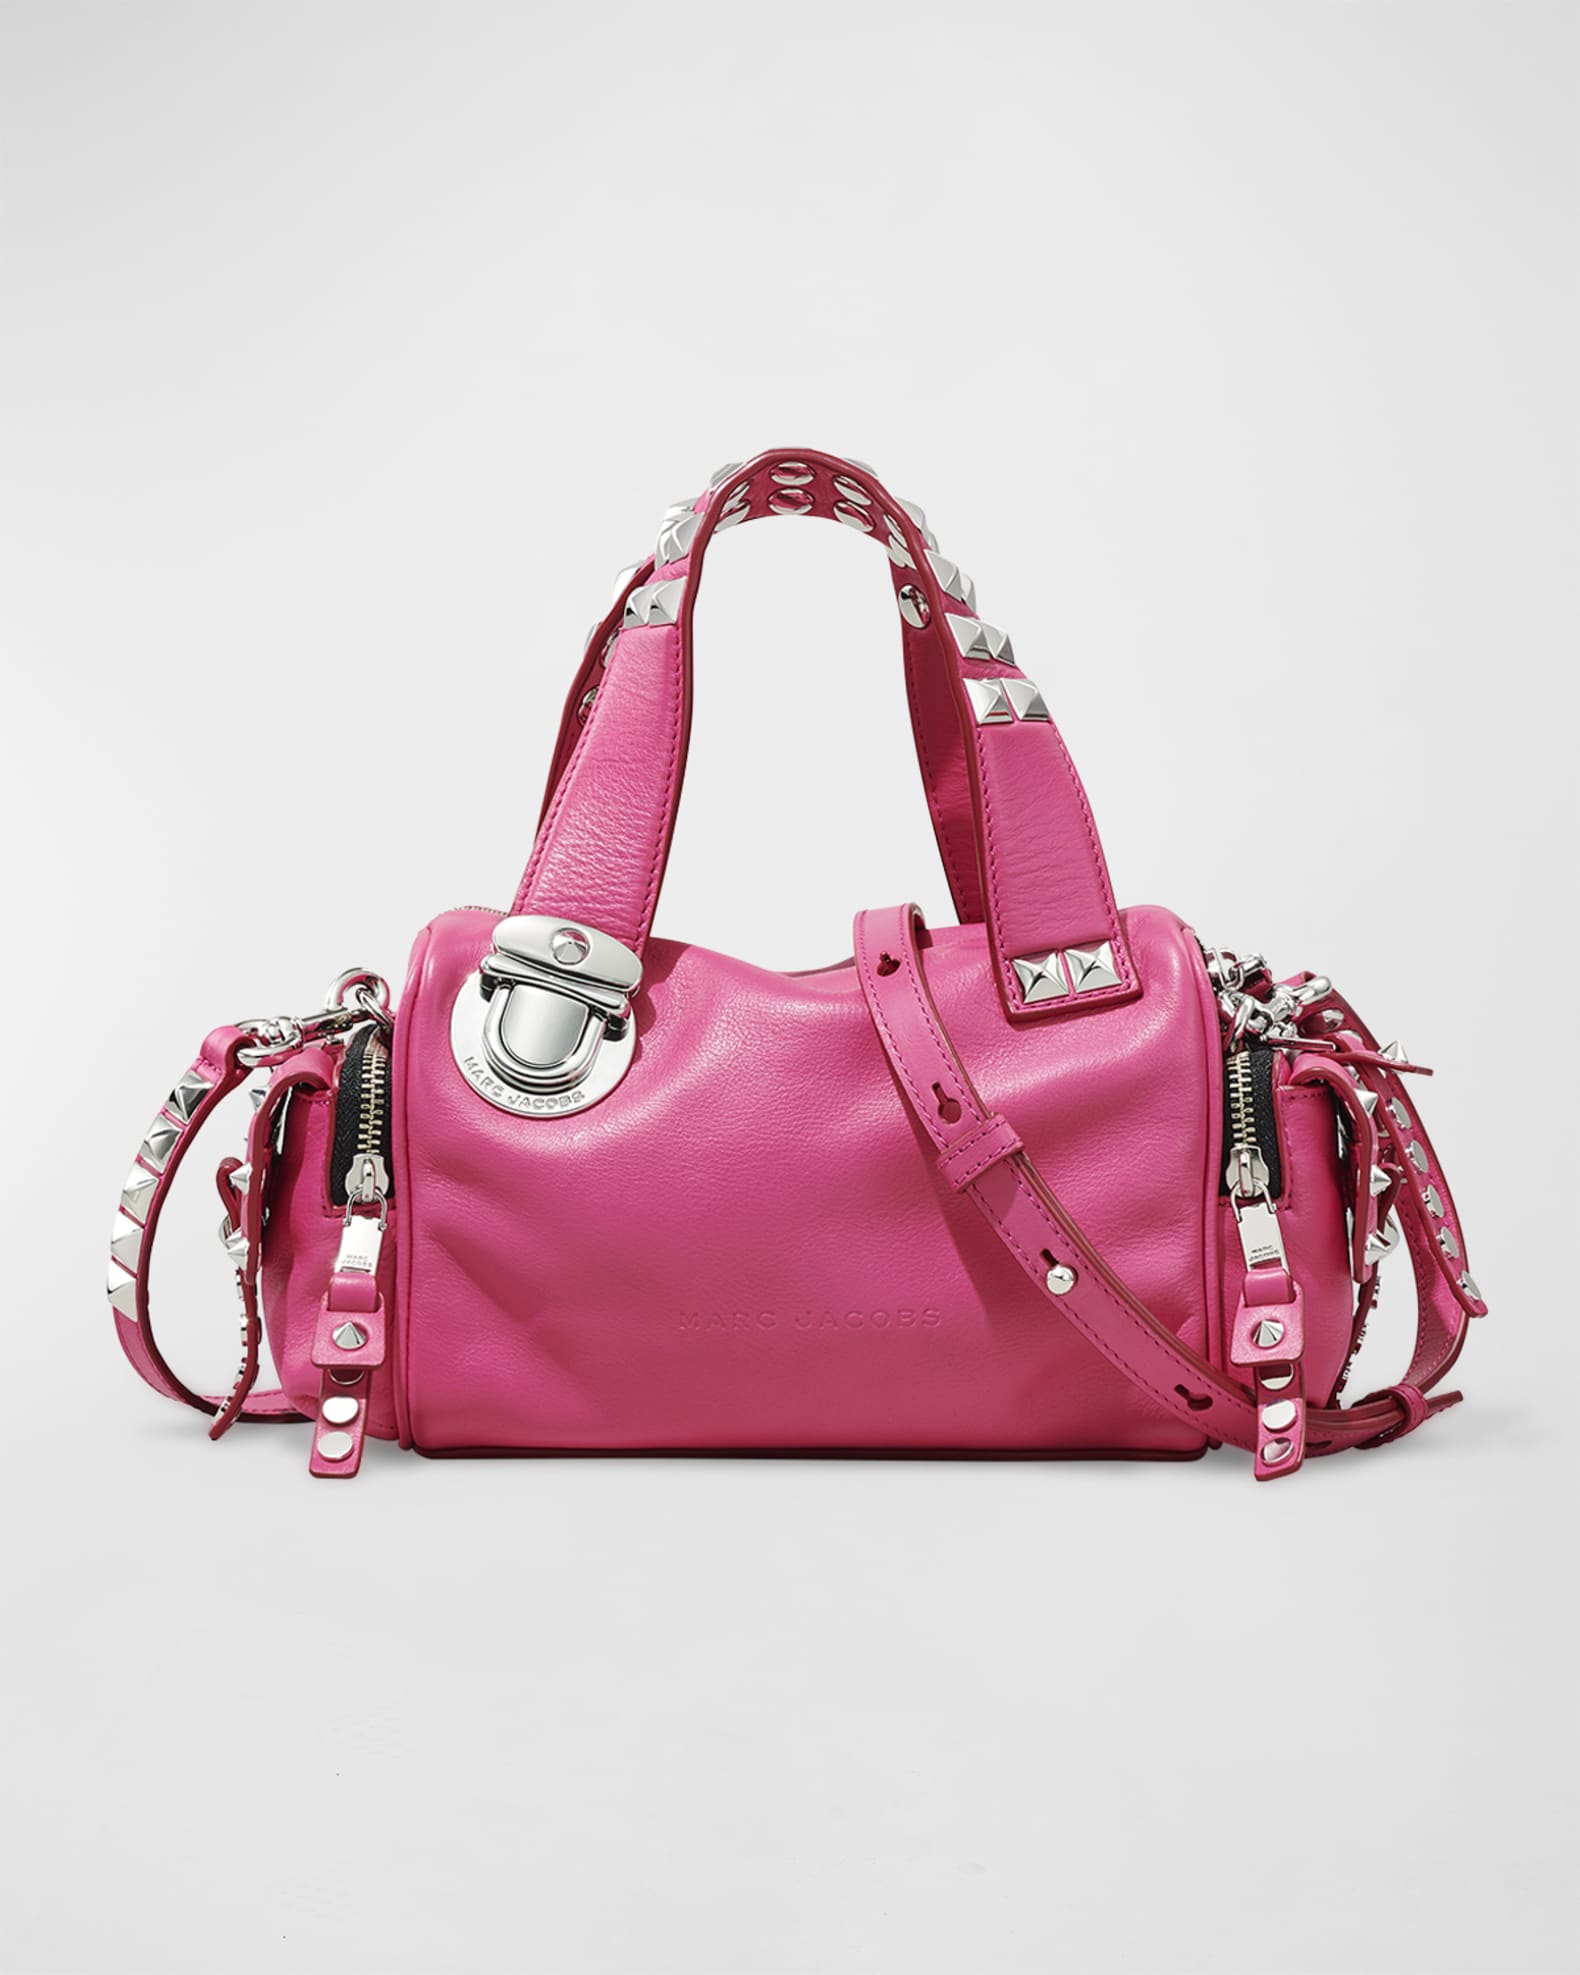 Bowling bags Marc Jacobs - Leather studded bowling bag